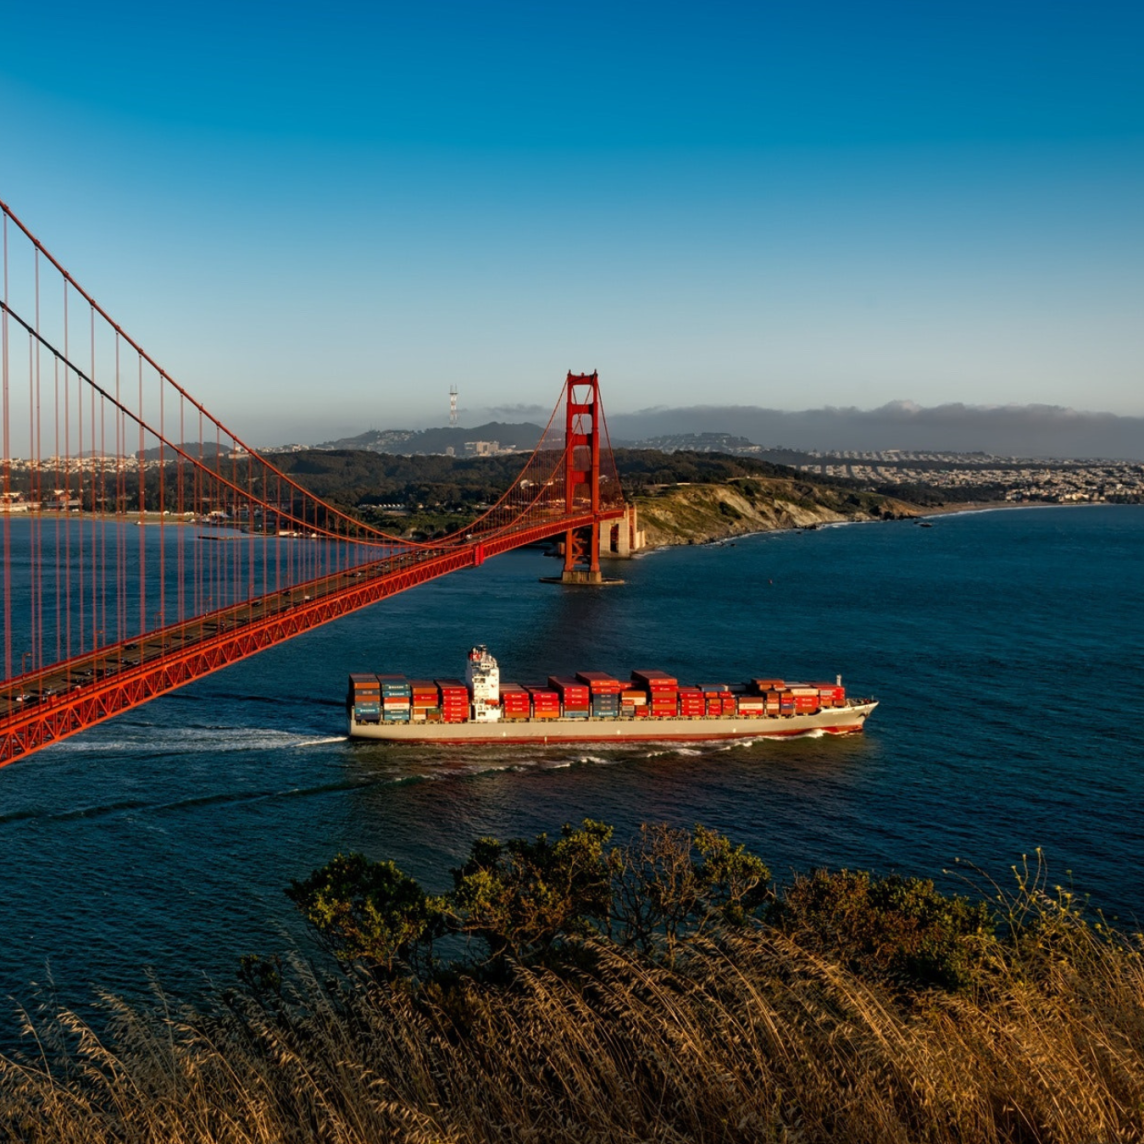 Shipping container ship passes under the Golden Gate Bridge in San Francisco